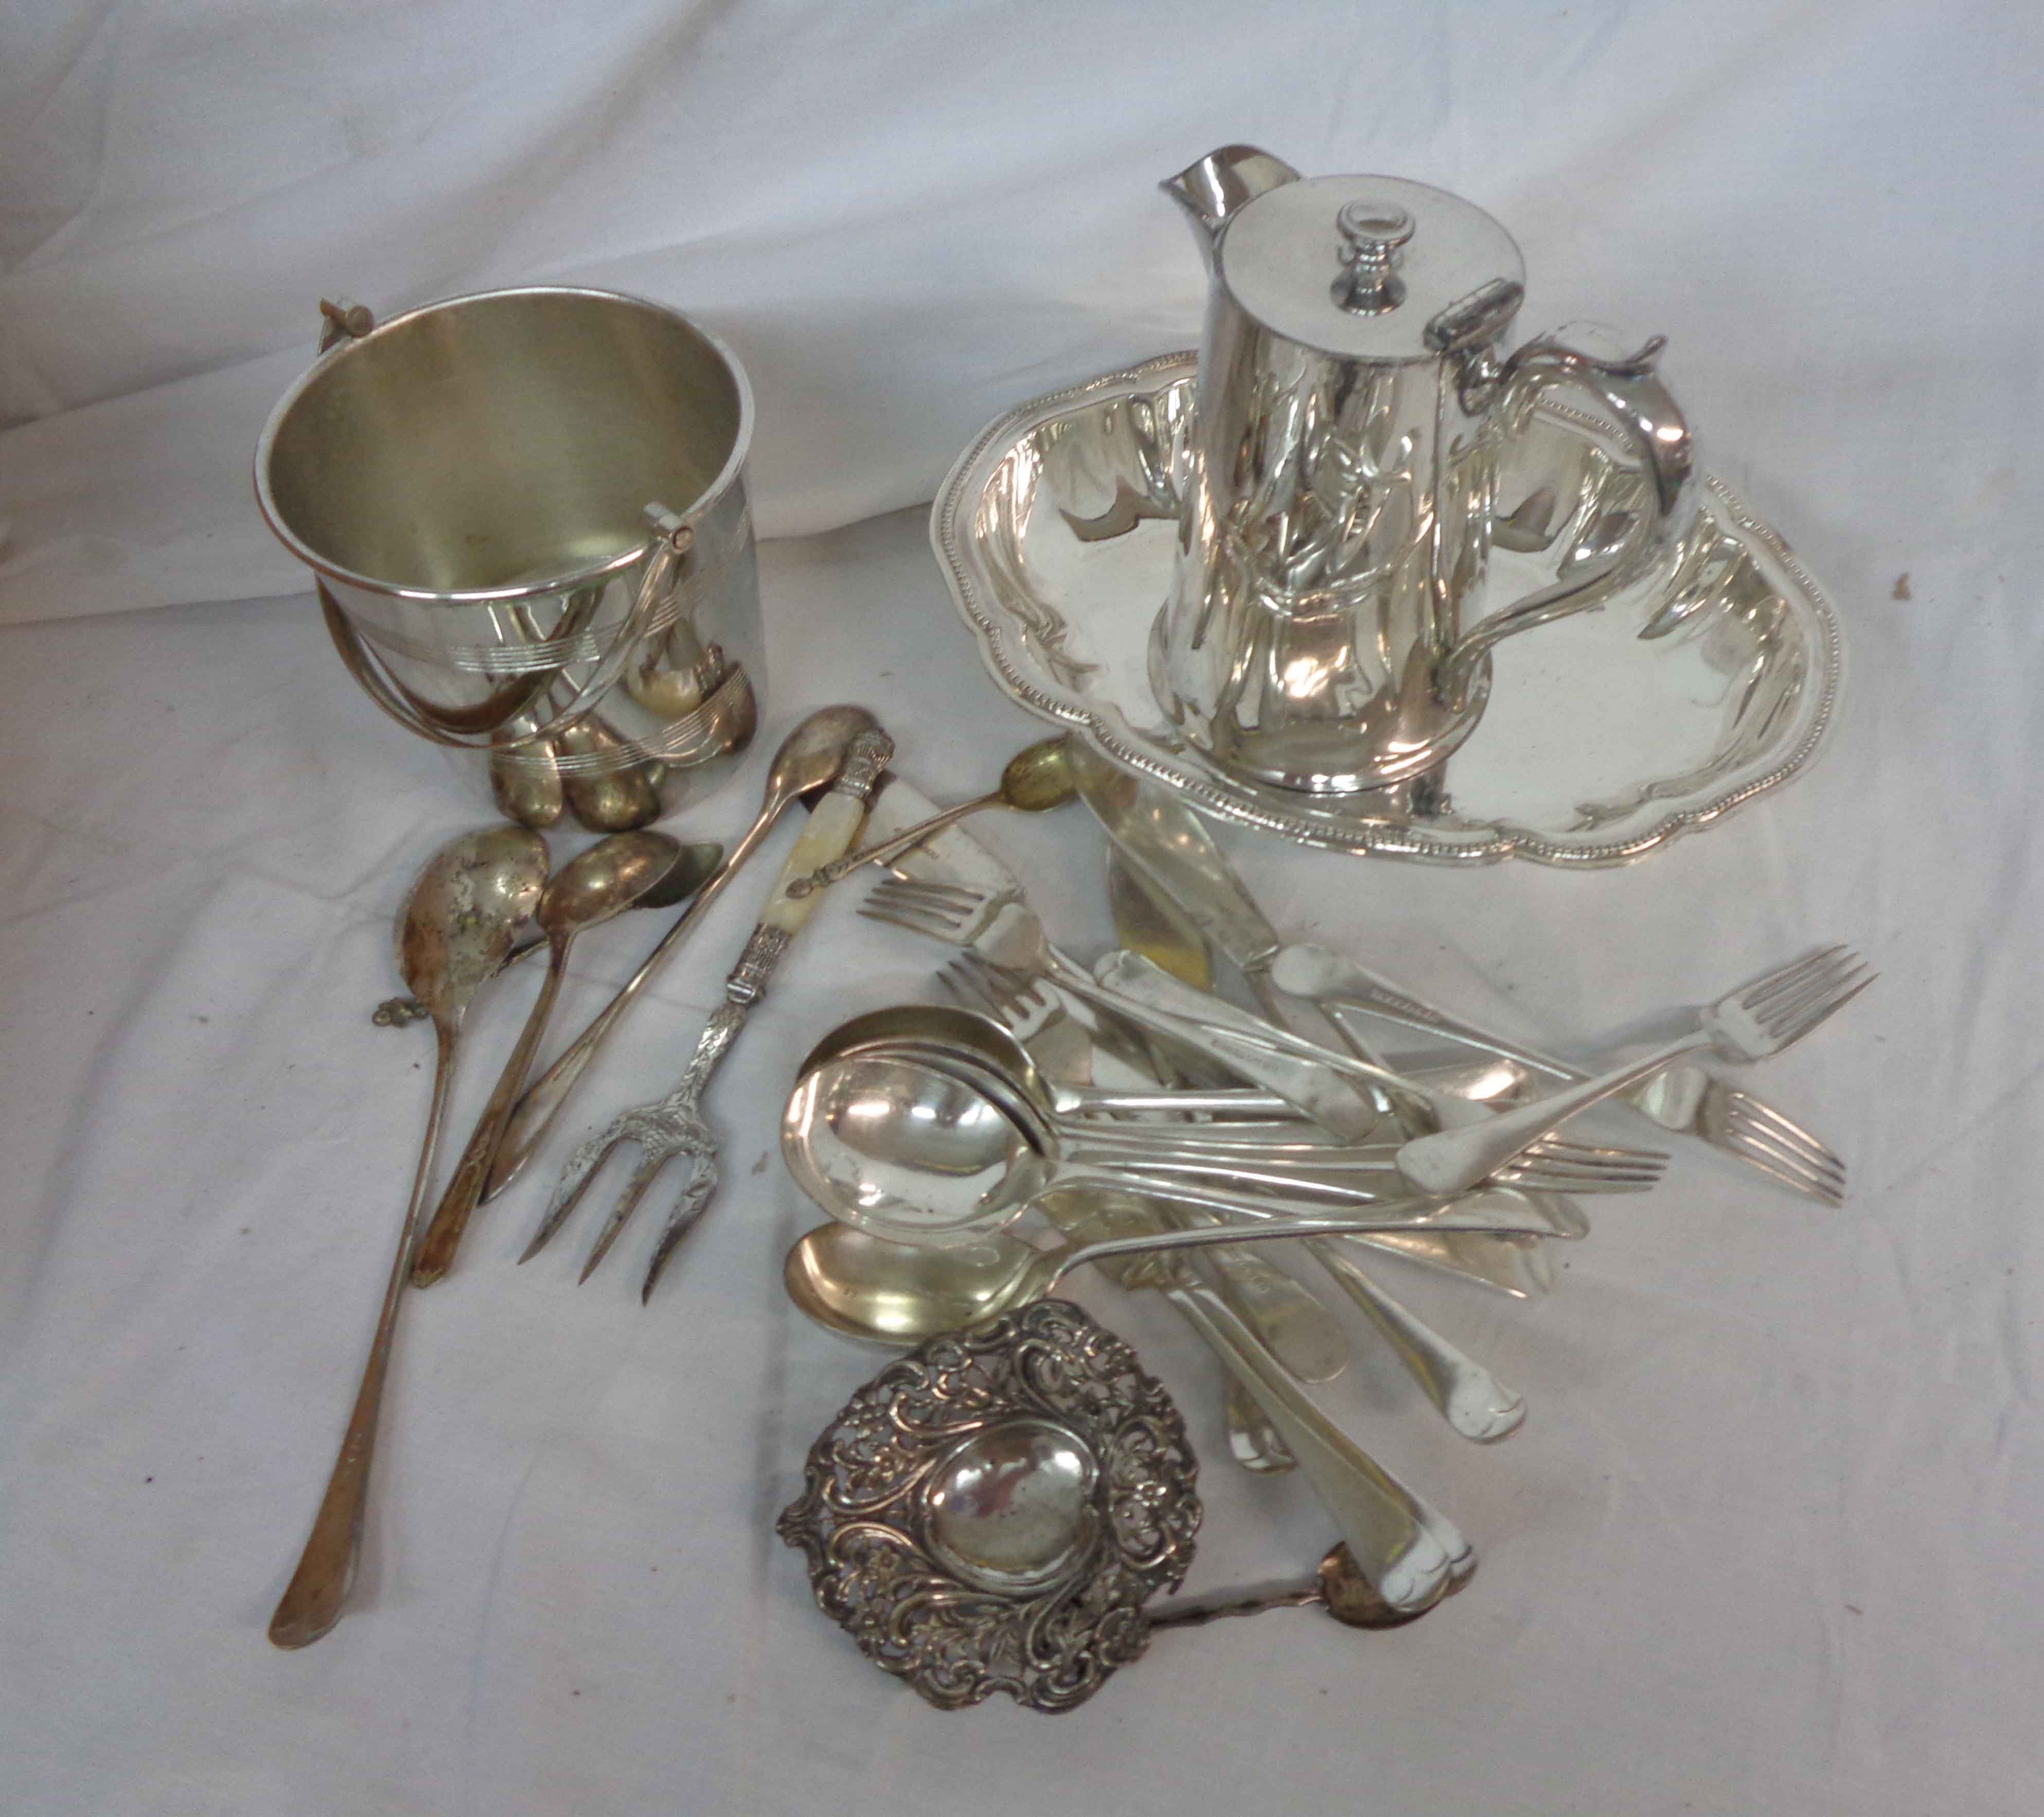 A box containing a small English silver pierced bon bon dish and a quantity of silver plated items